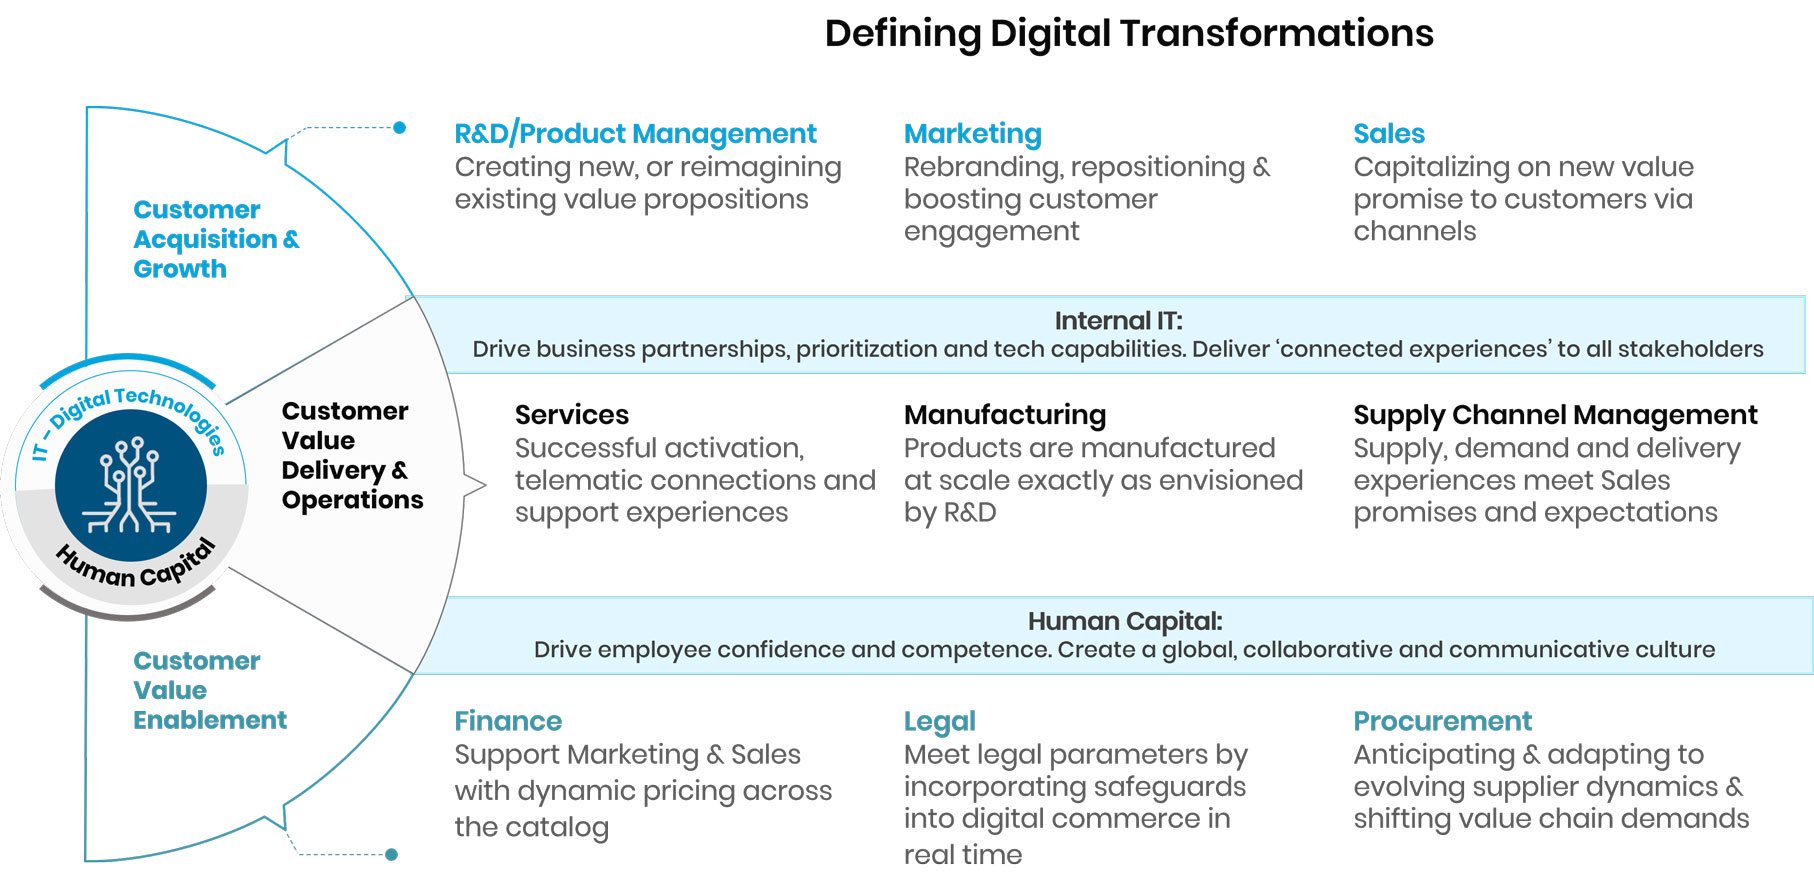 Digital Transformation Definition Graphic Showing Customer Centricity in Business Functions